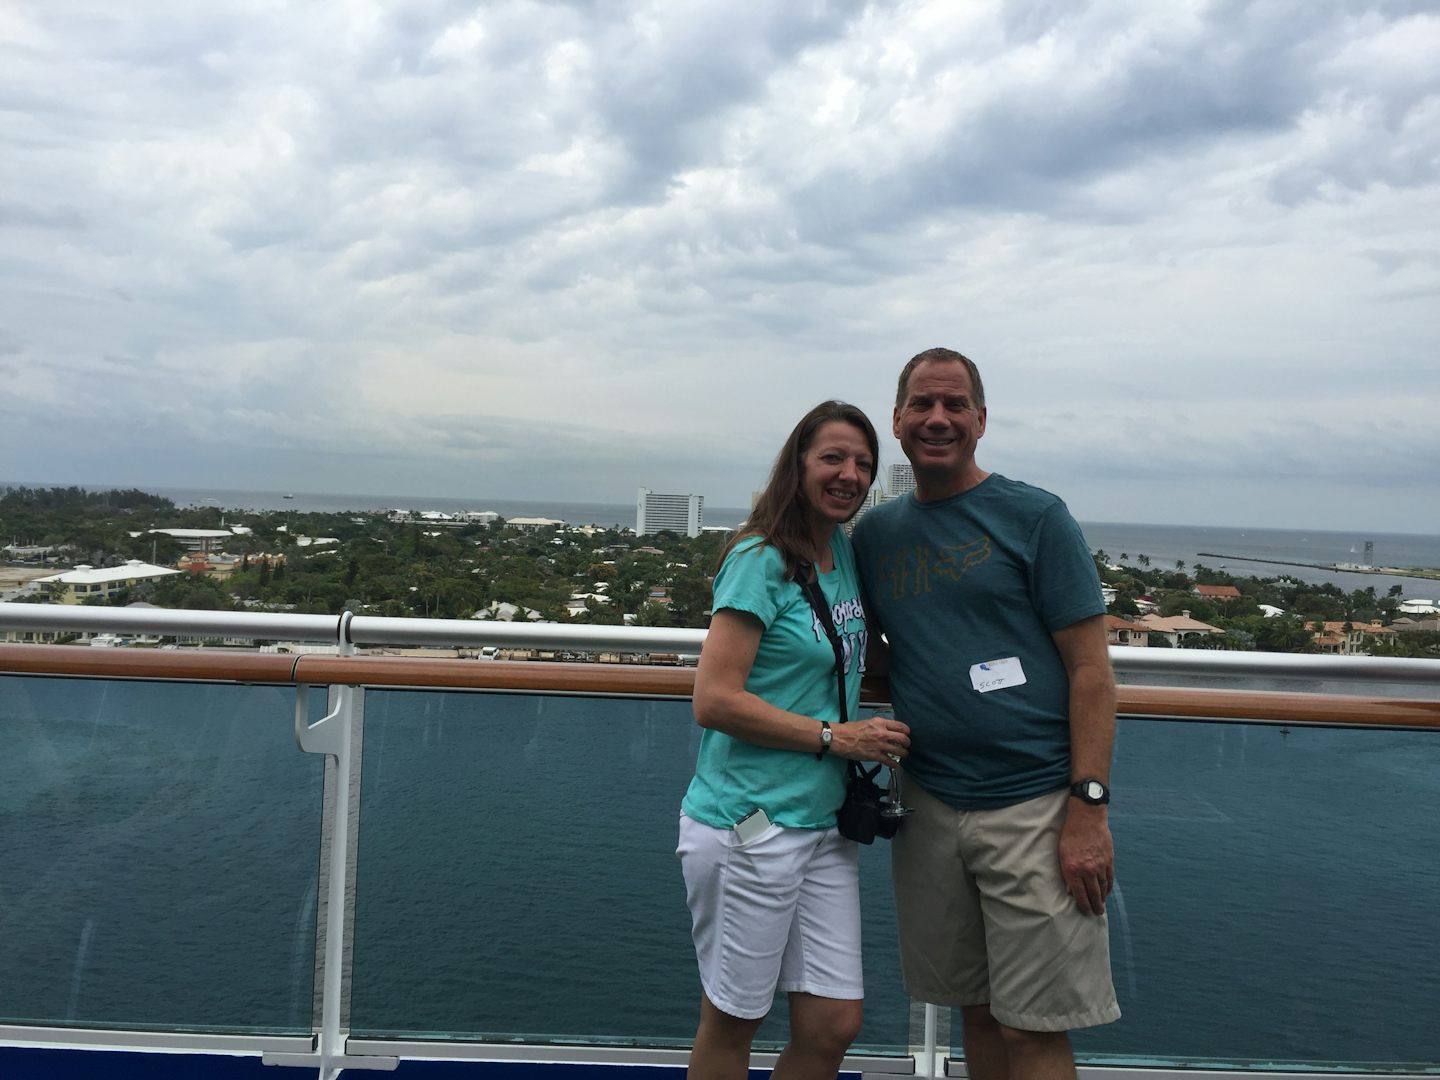 Sailing out of Port Everglades/Ft. Lauderdale